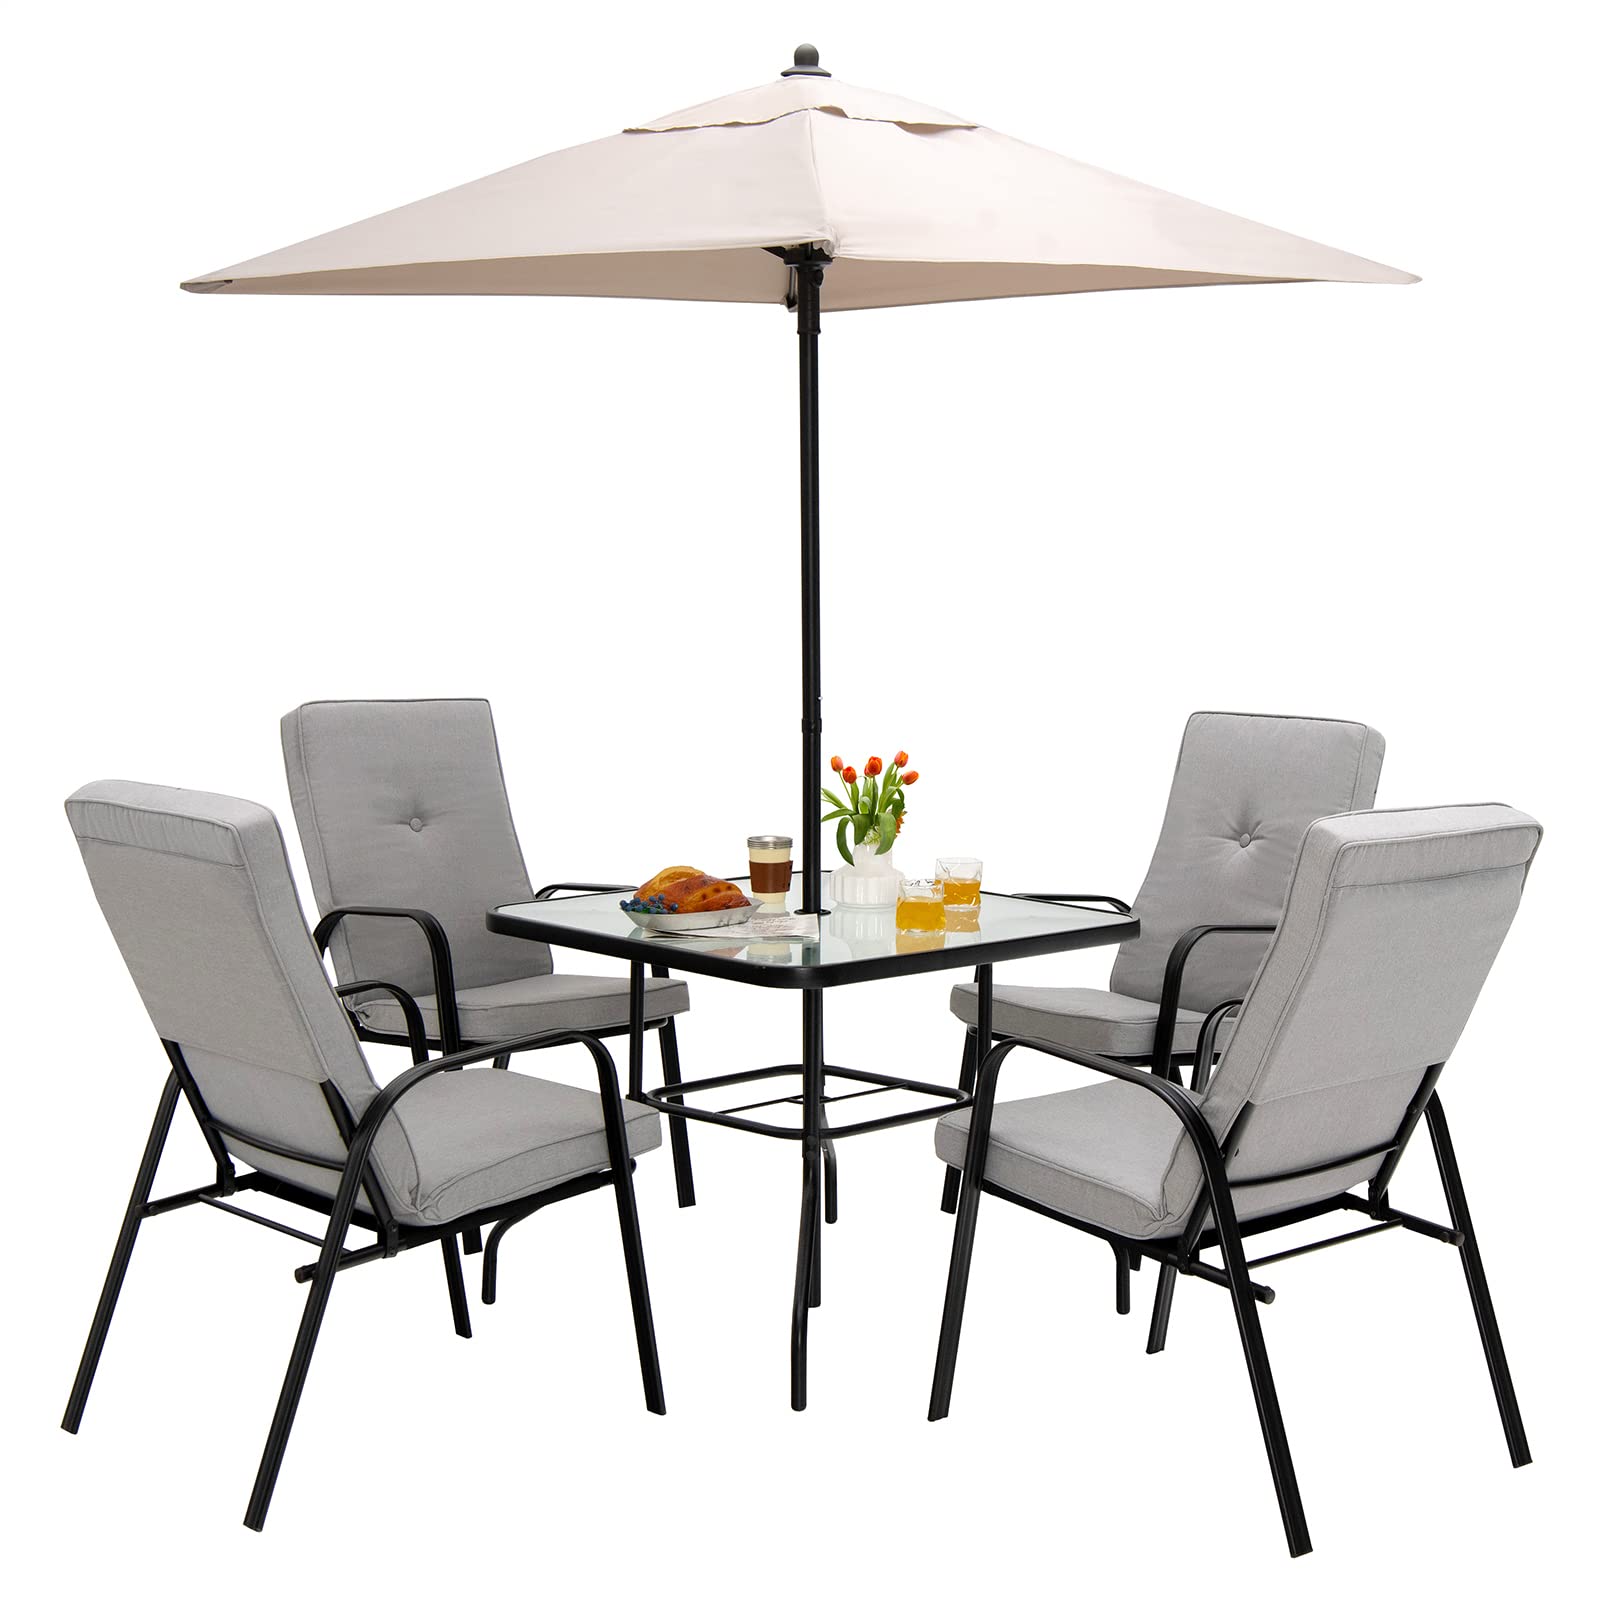 Giantex 6 Piece Outdoor Table and Chairs Set, Patio Dining Set with Umbrella